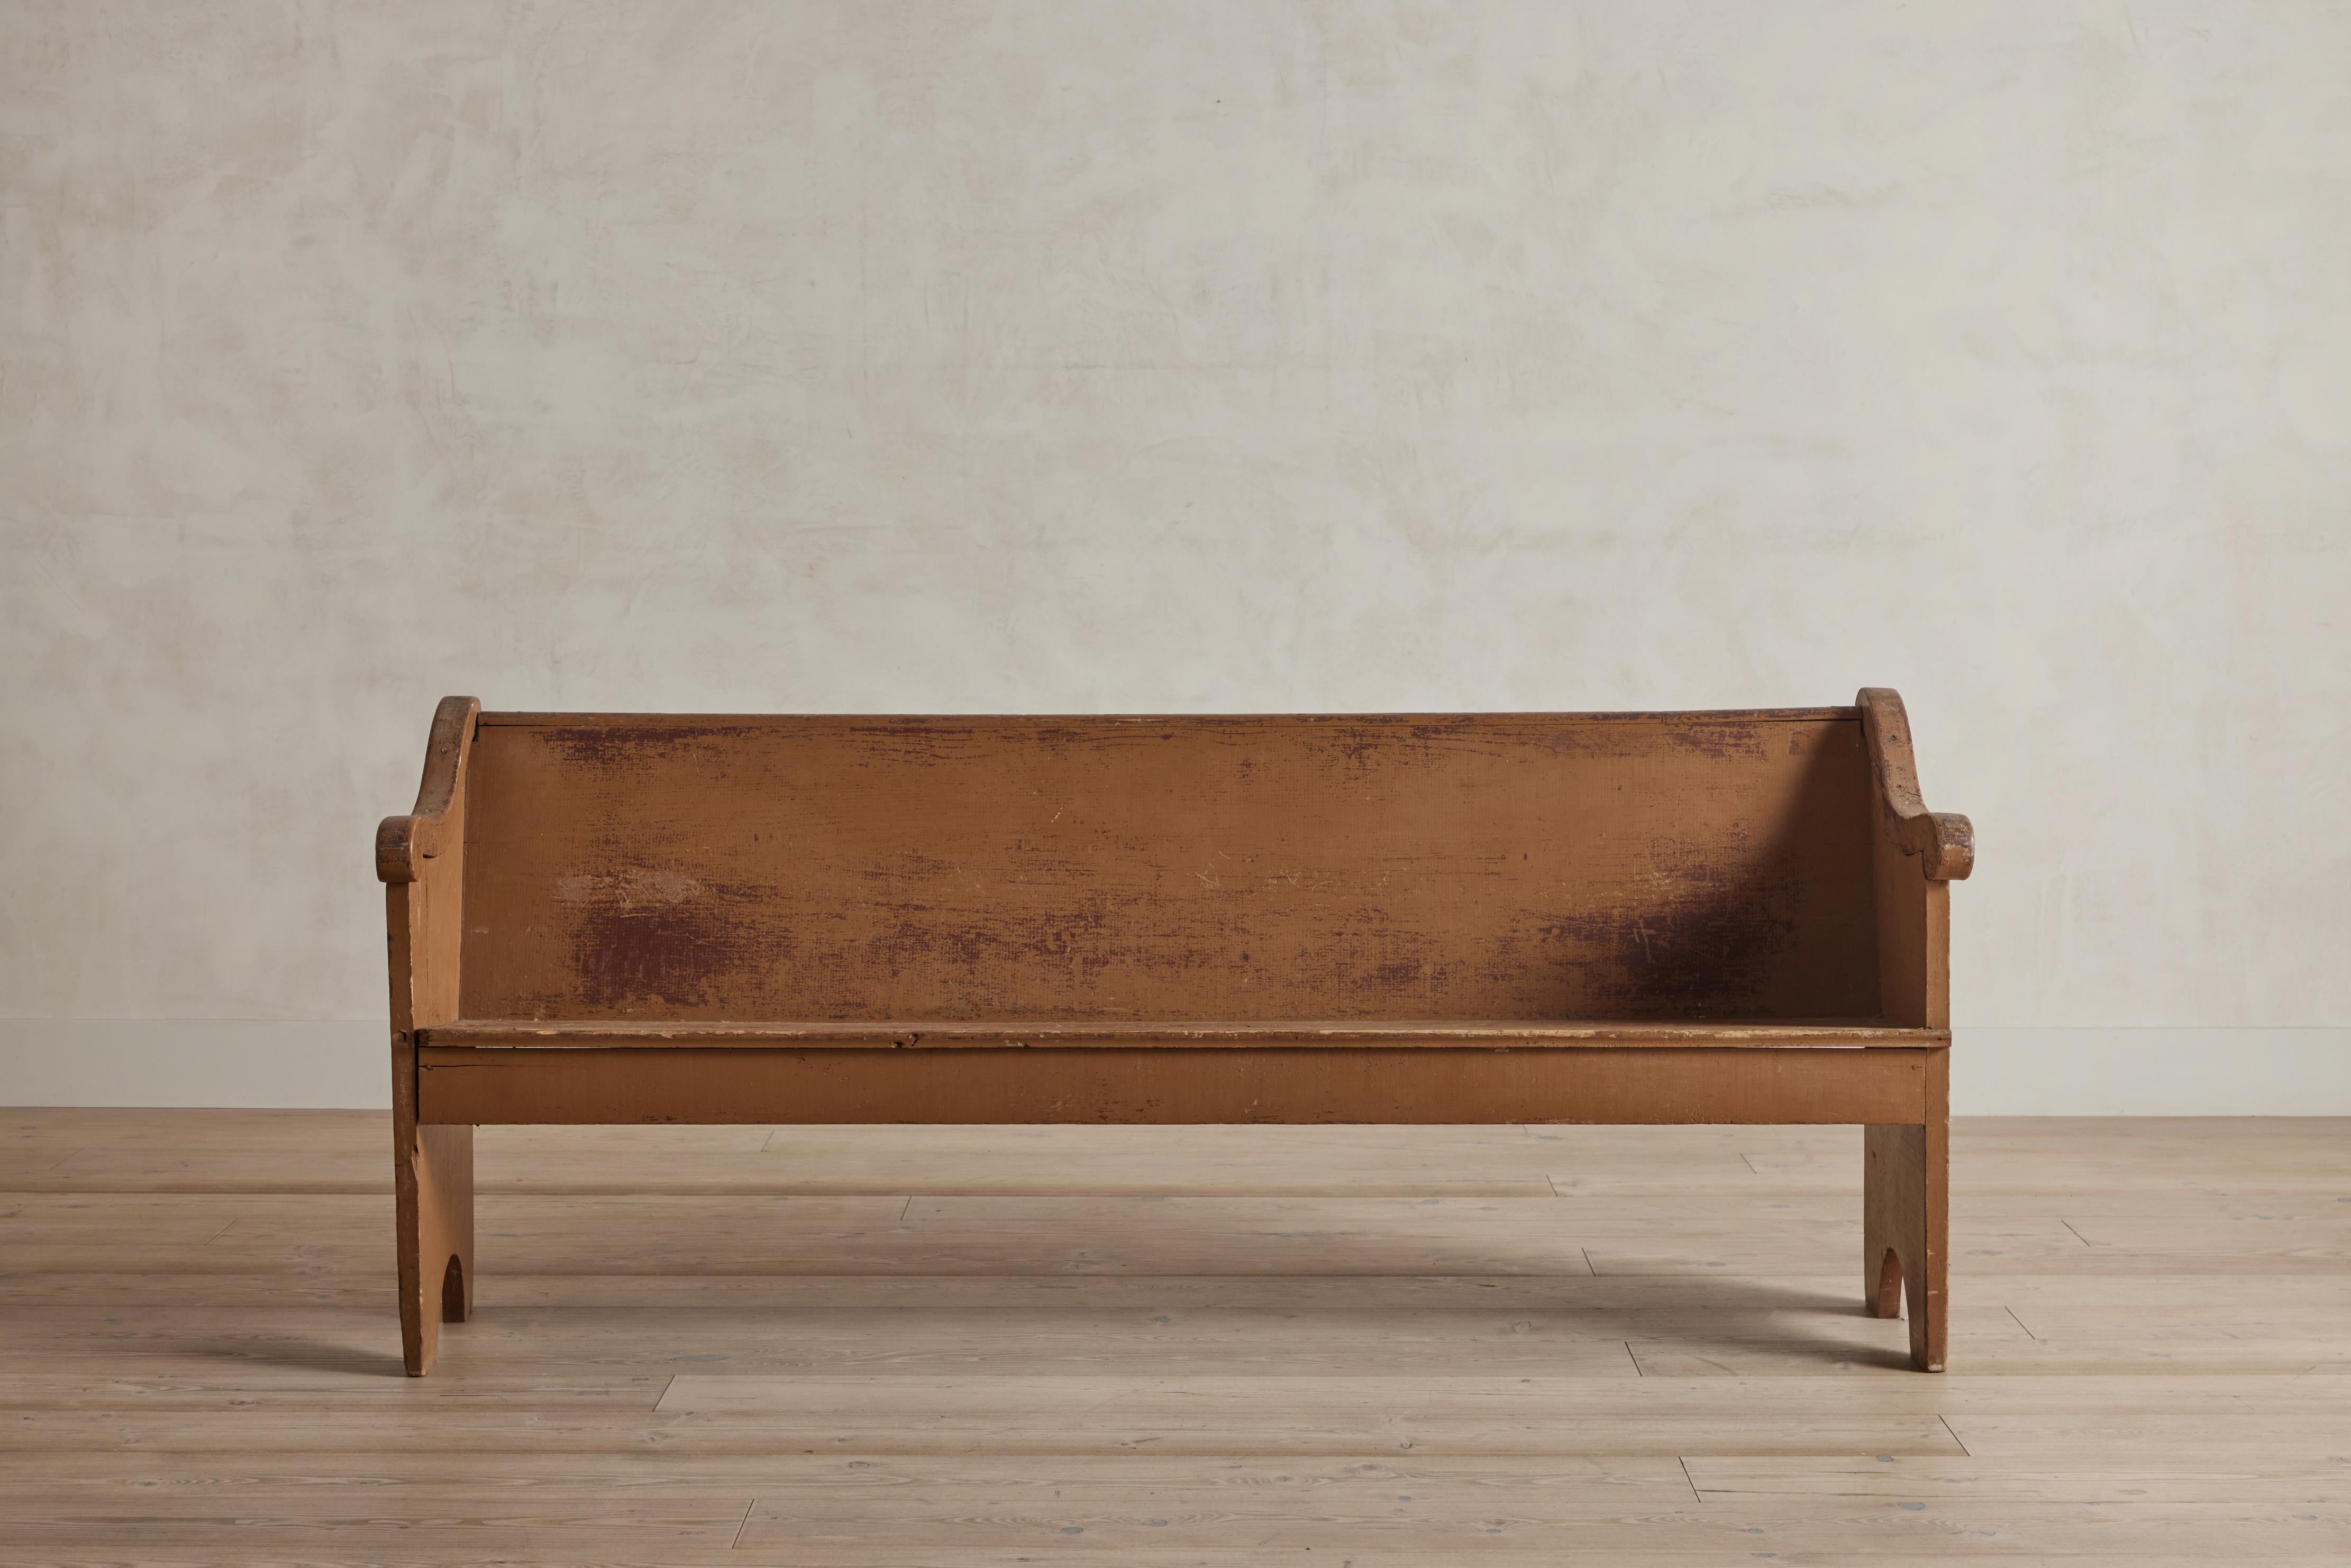 Early American wood bench painted in a rich mustard hue. This bench was most likely used as a church pew. There is visible wear on wood and painted finish that is consistent with age and use. United States, circa 1850.